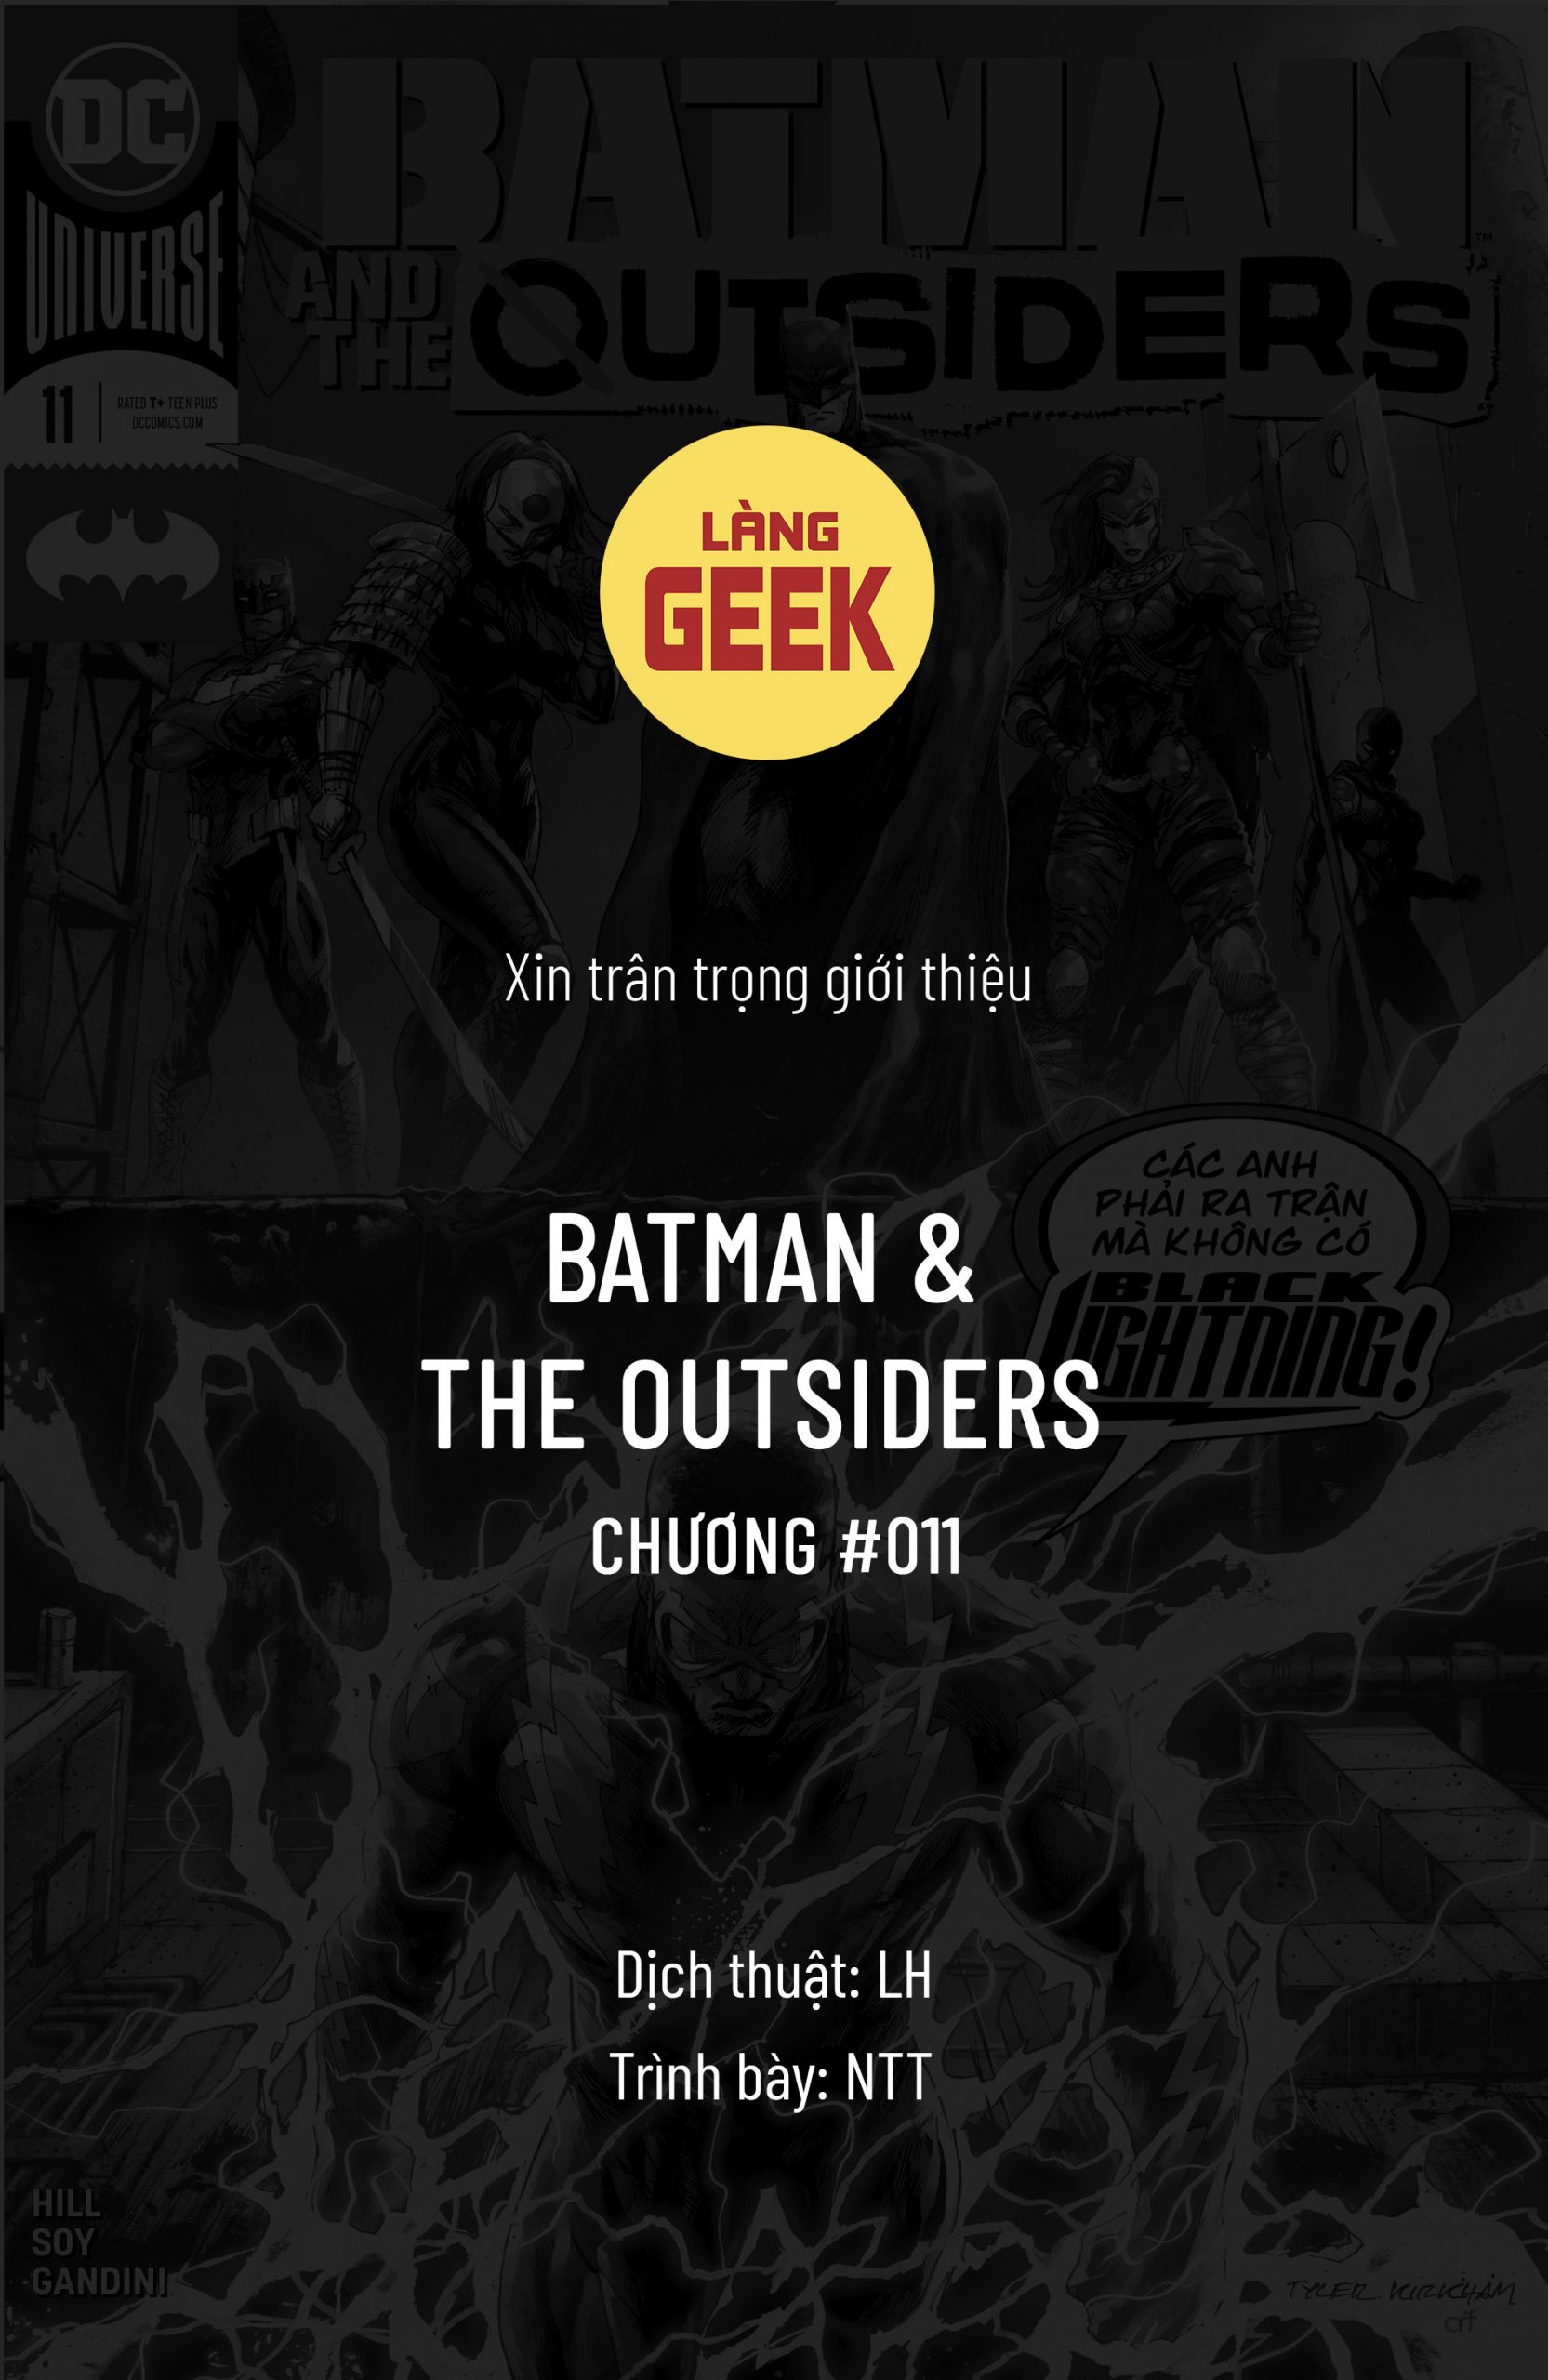 https://langgeek.net/wp-content/webpc-passthru.php?src=https://langgeek.net/wp-content/uploads/2021/11/Batman-and-the-Outsiders-011-001-scaled.jpg&nocache=1